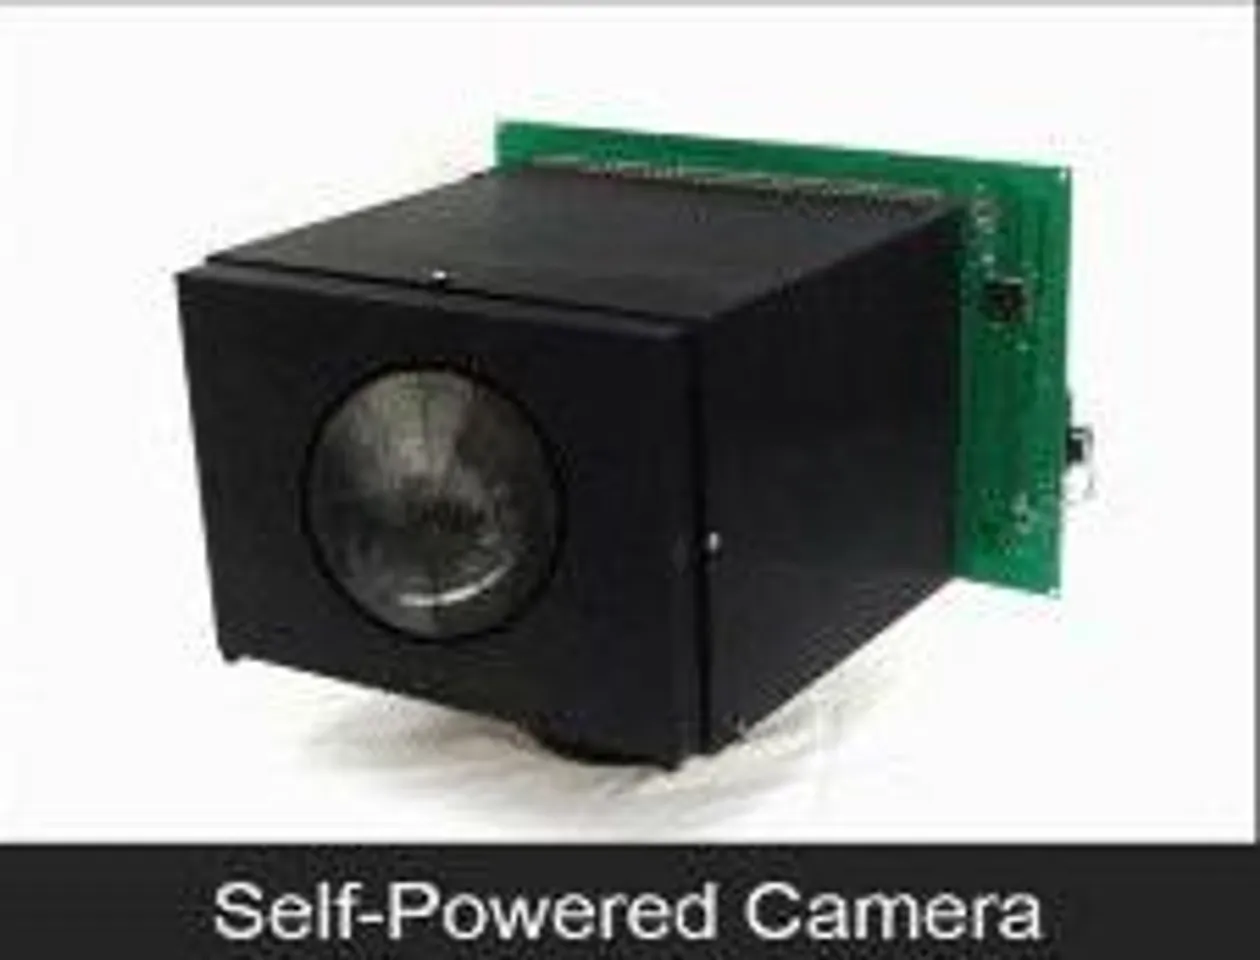 Columbia Engineering professor invents video camera that runs without a battery